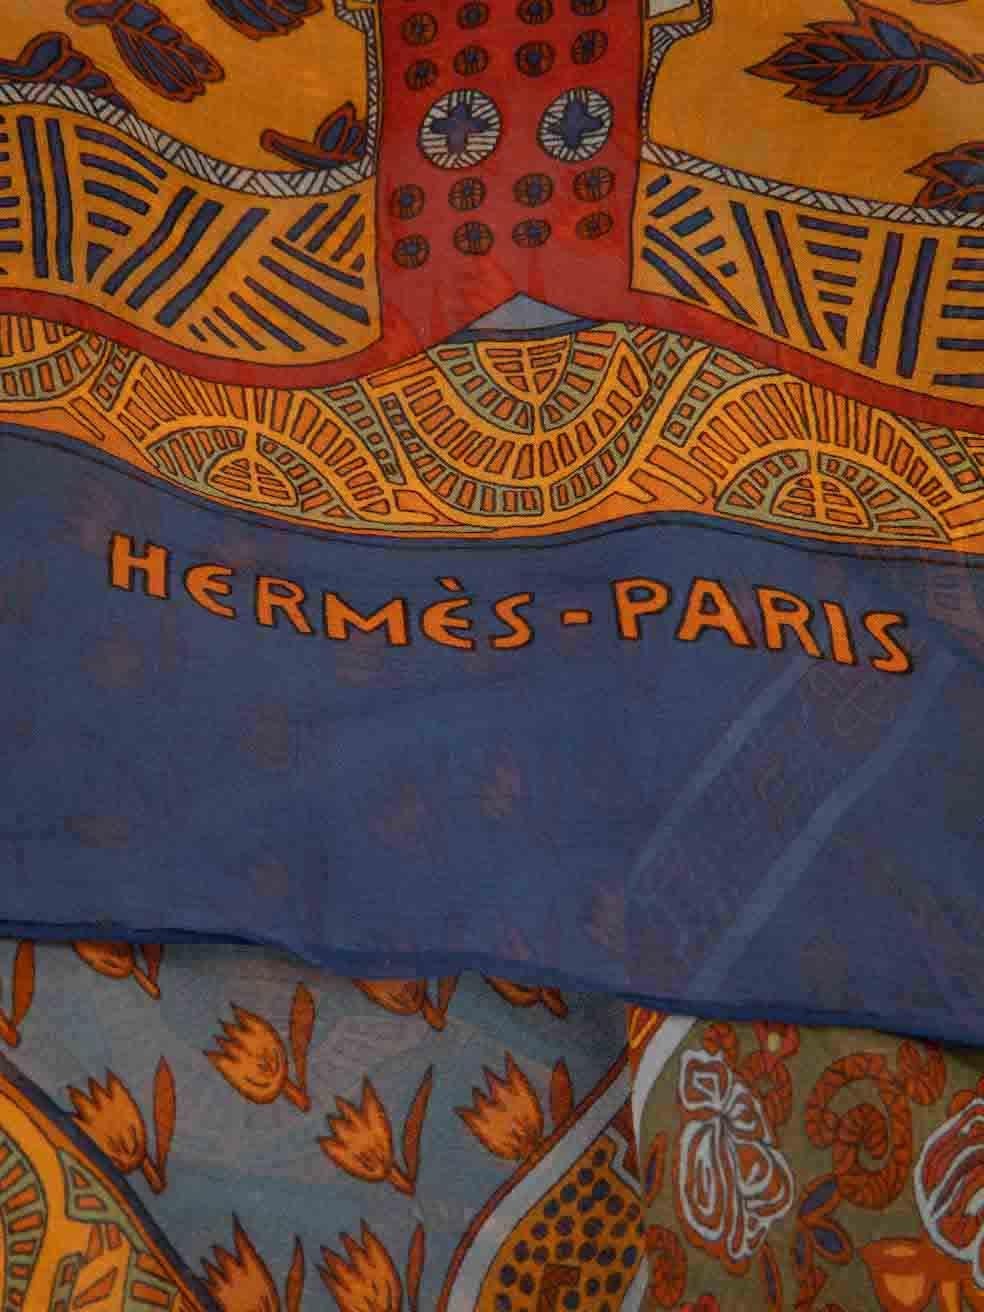 CONDITION is Very good. Minimal wear to the scarf is evident. Minimal pull to thread to the top of the scarf on this used Hermès designer resale item.
 
 
 
 Details
 
 
 Multicolour- blue, brown
 
 Silk
 
 Scarf
 
 Horse printed
 
 
 

 
 Made in